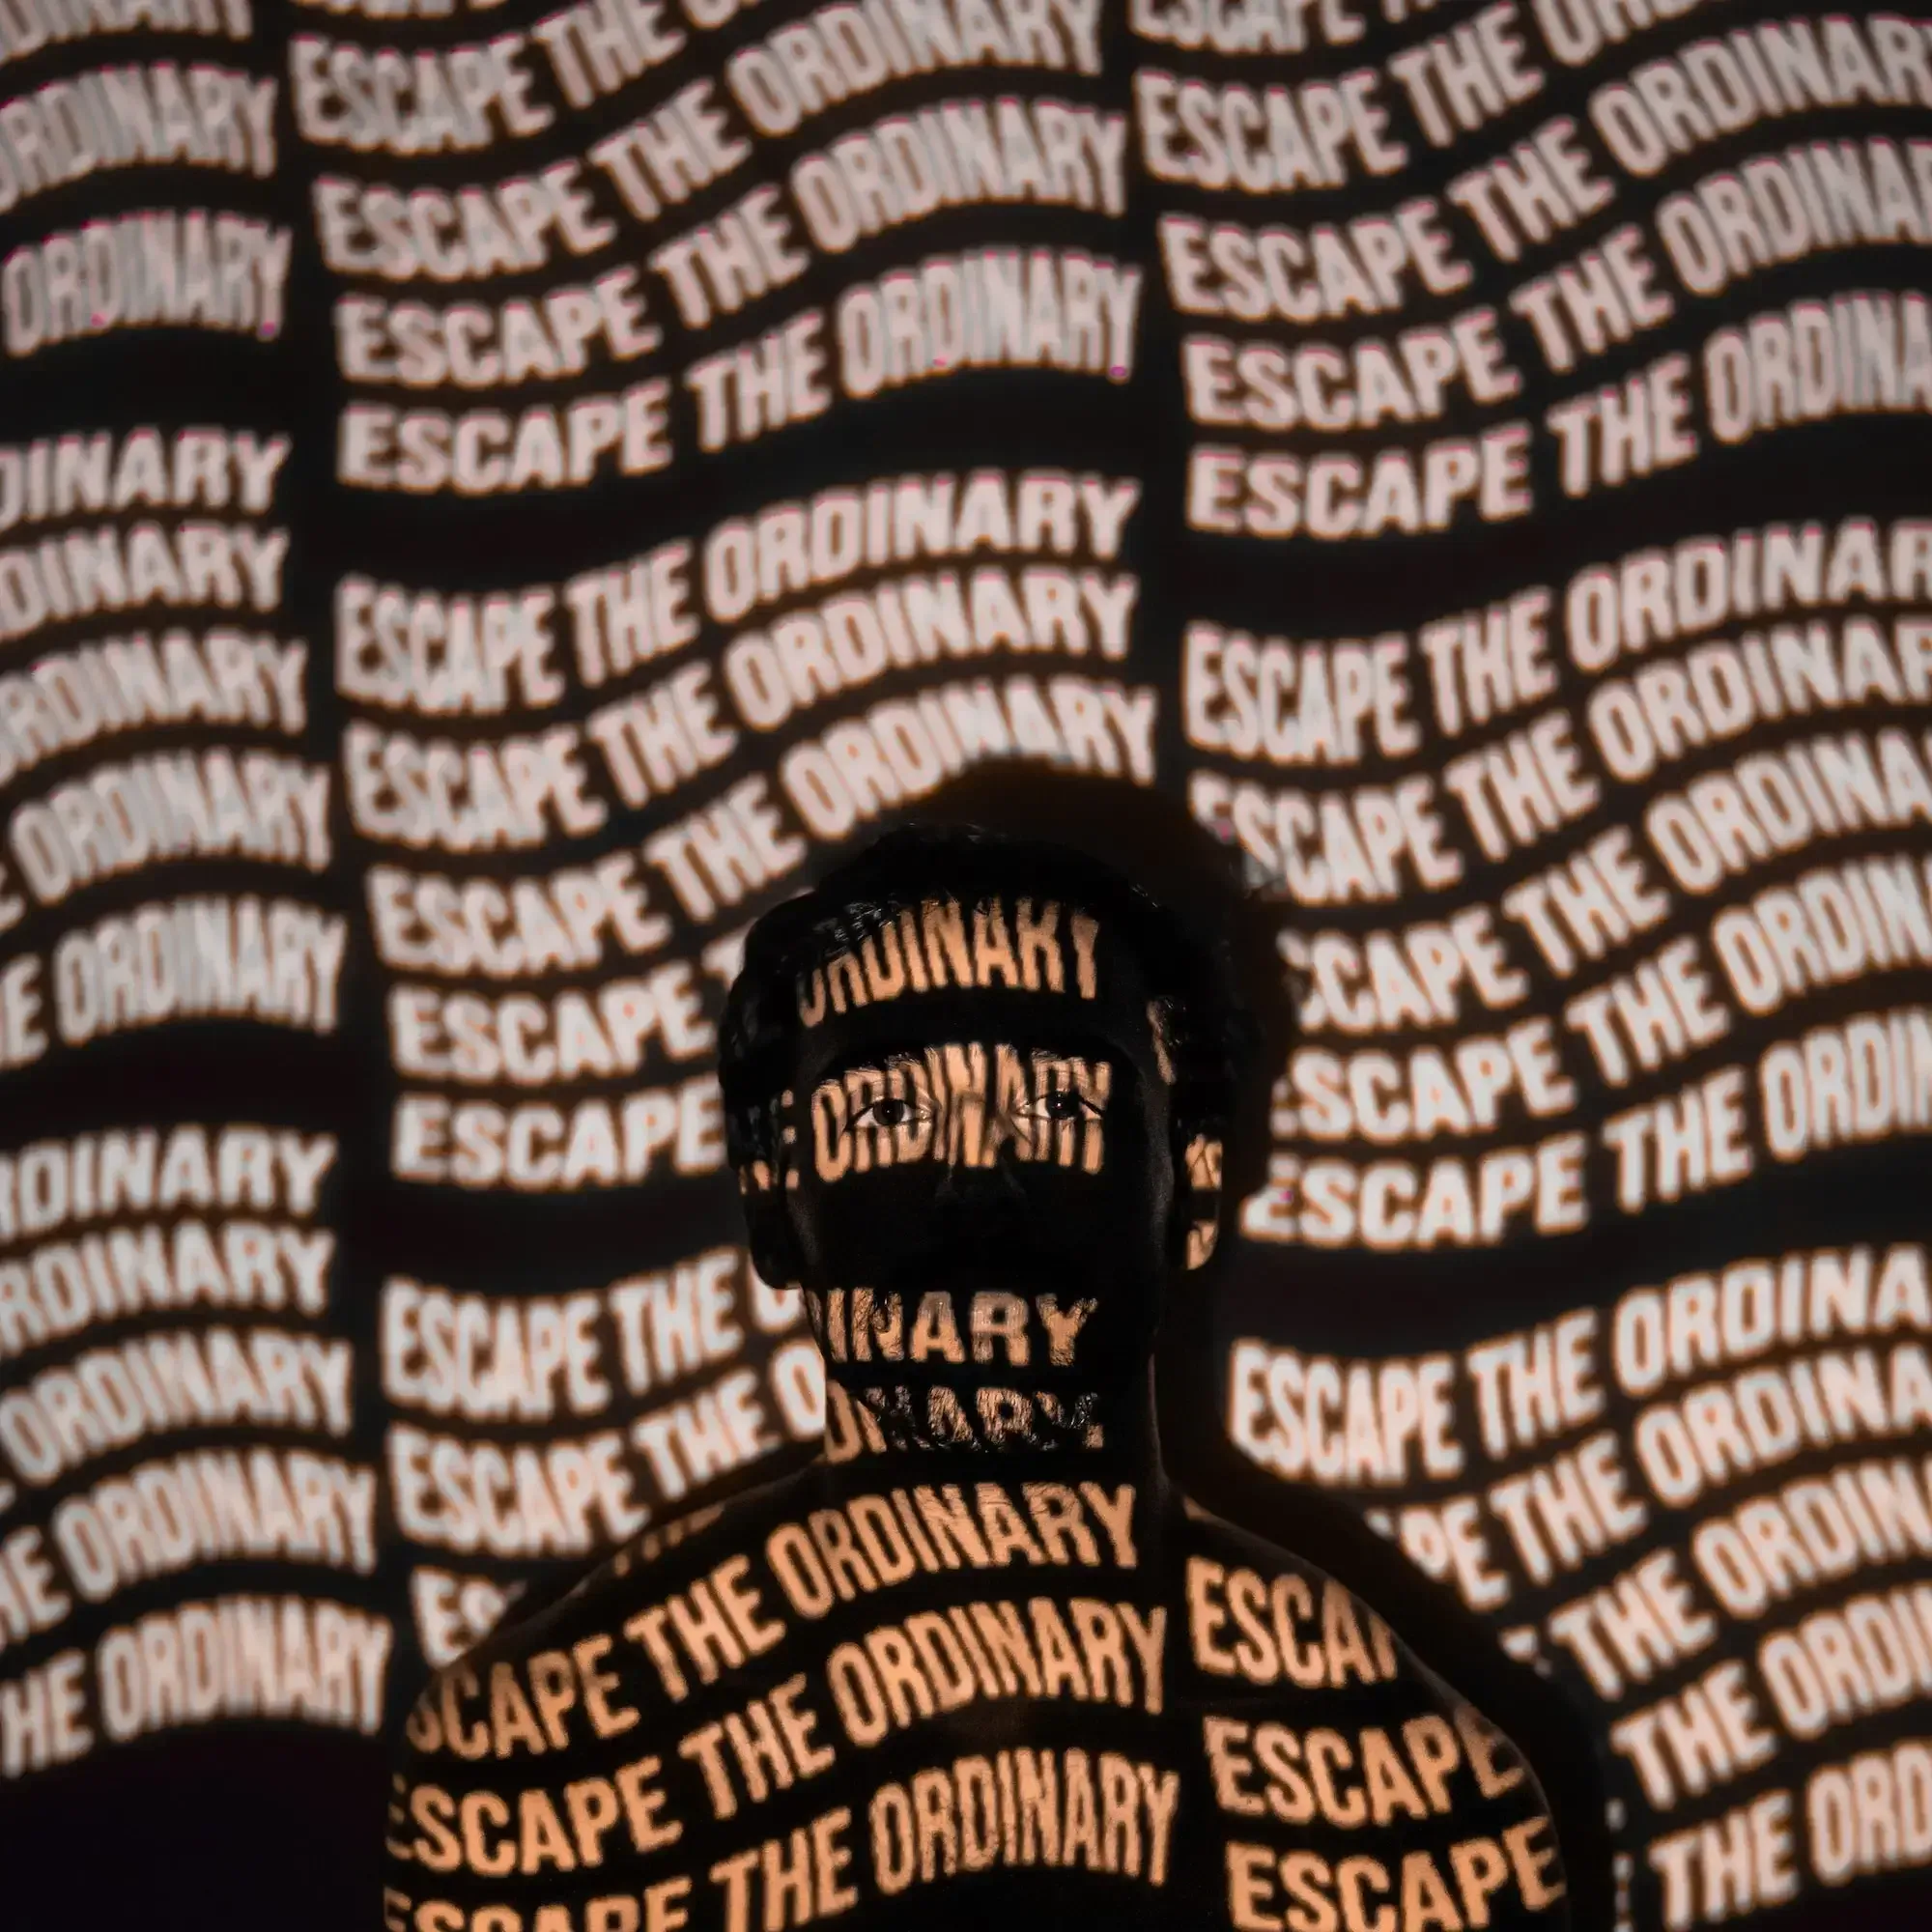 Man standing in front of a projector that throws yellow light at him, spelling "ESCAPE THE ORDINARY".